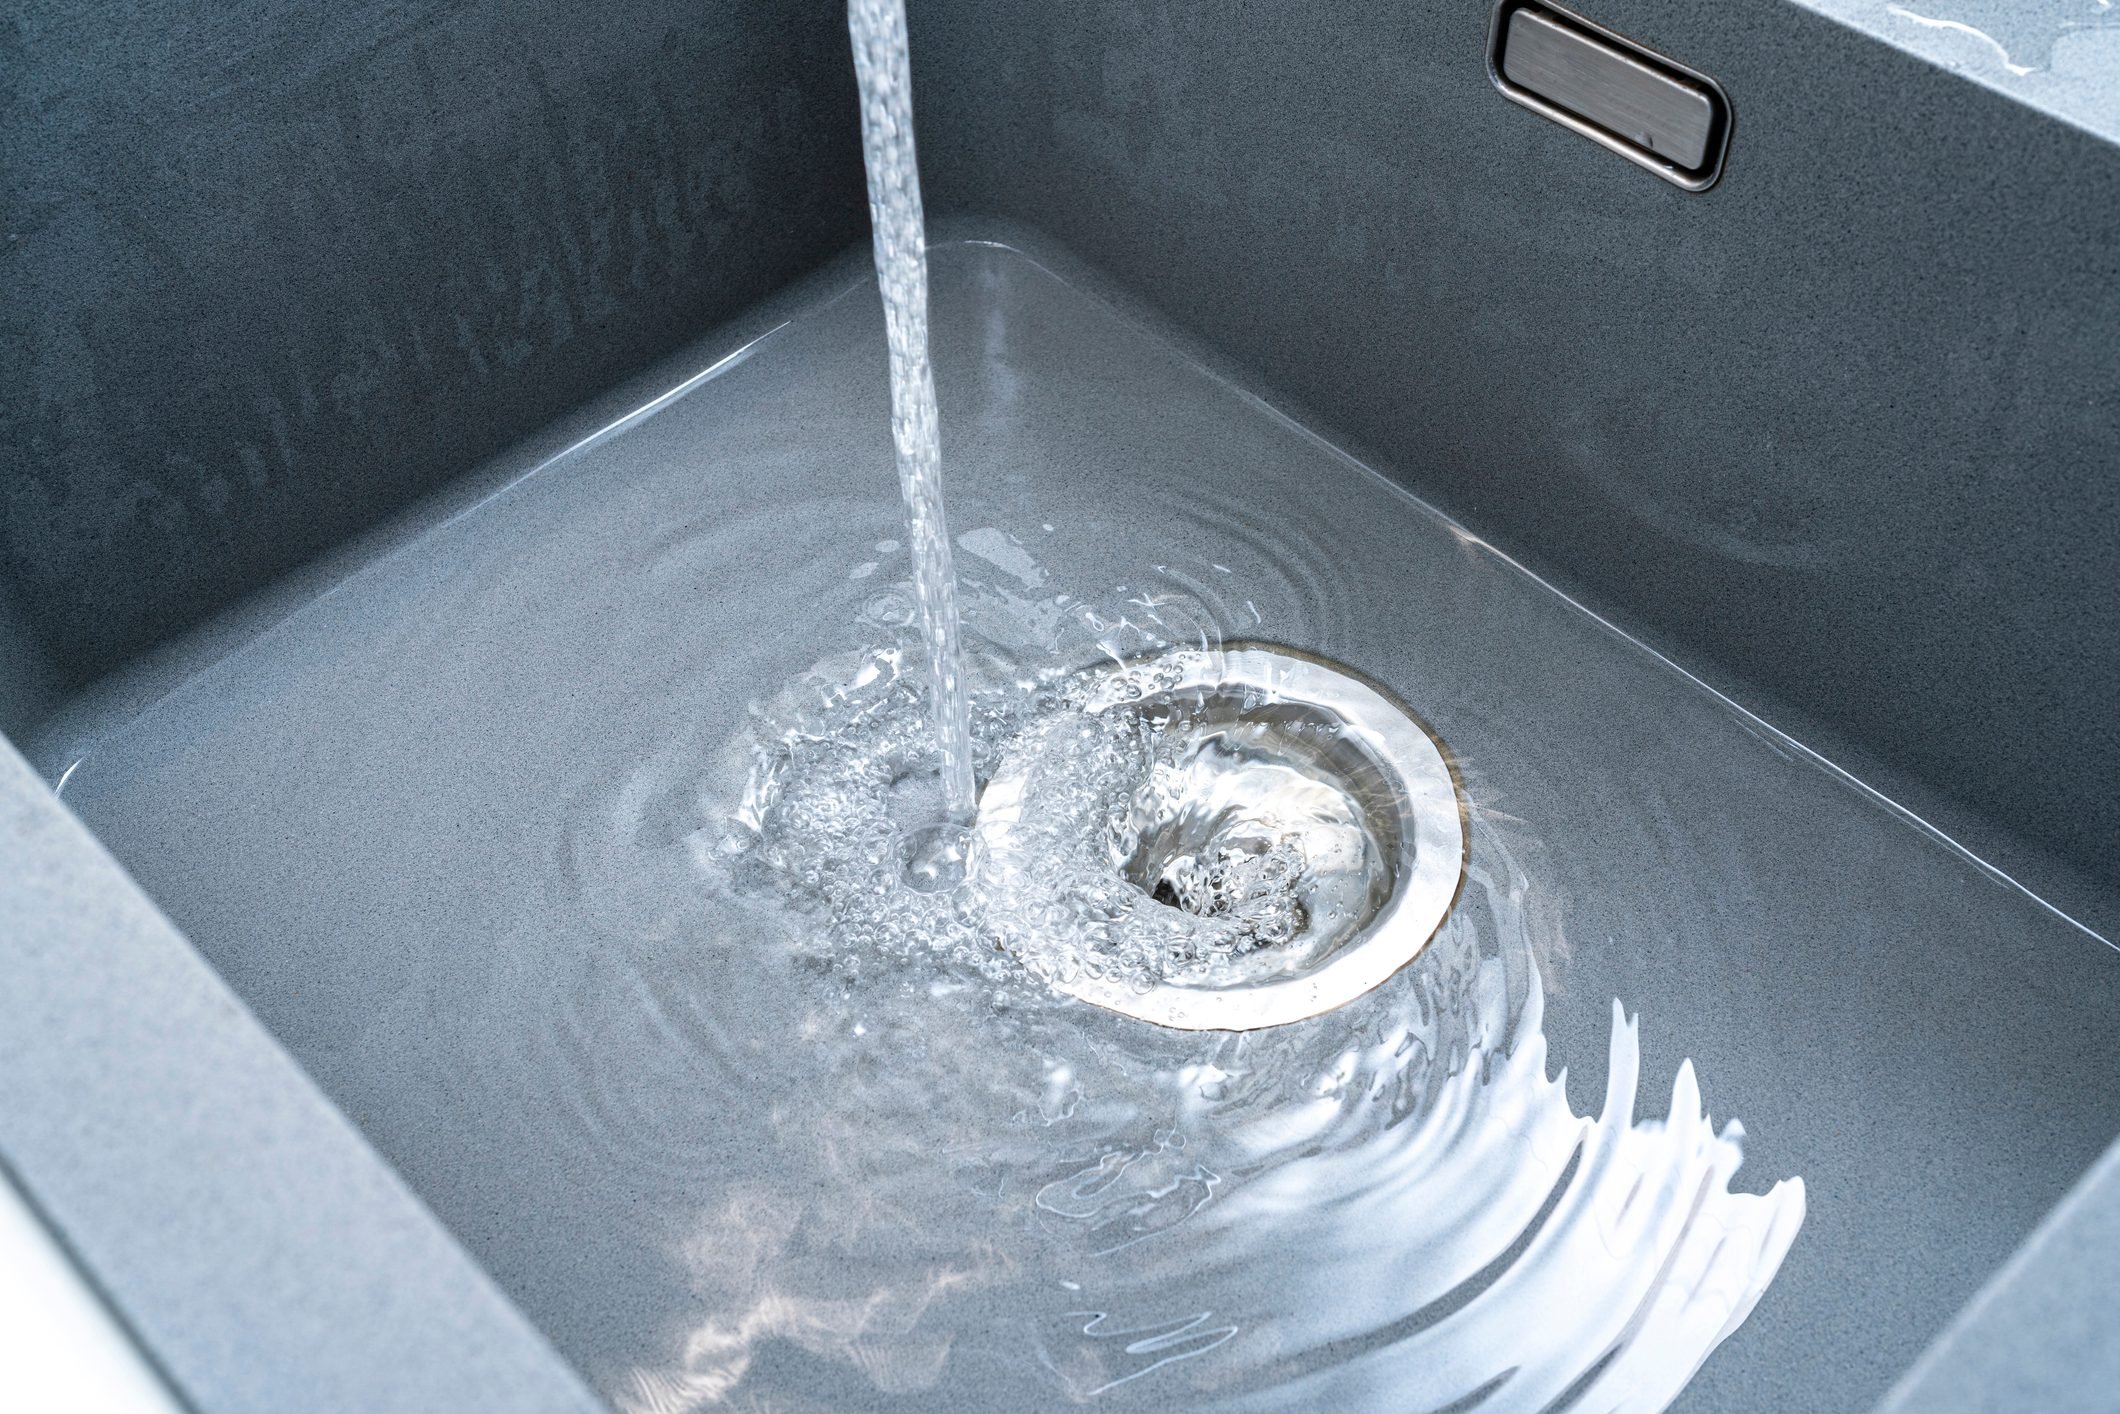 Can a Clogged Sink Affect Others in an Apartment Building?